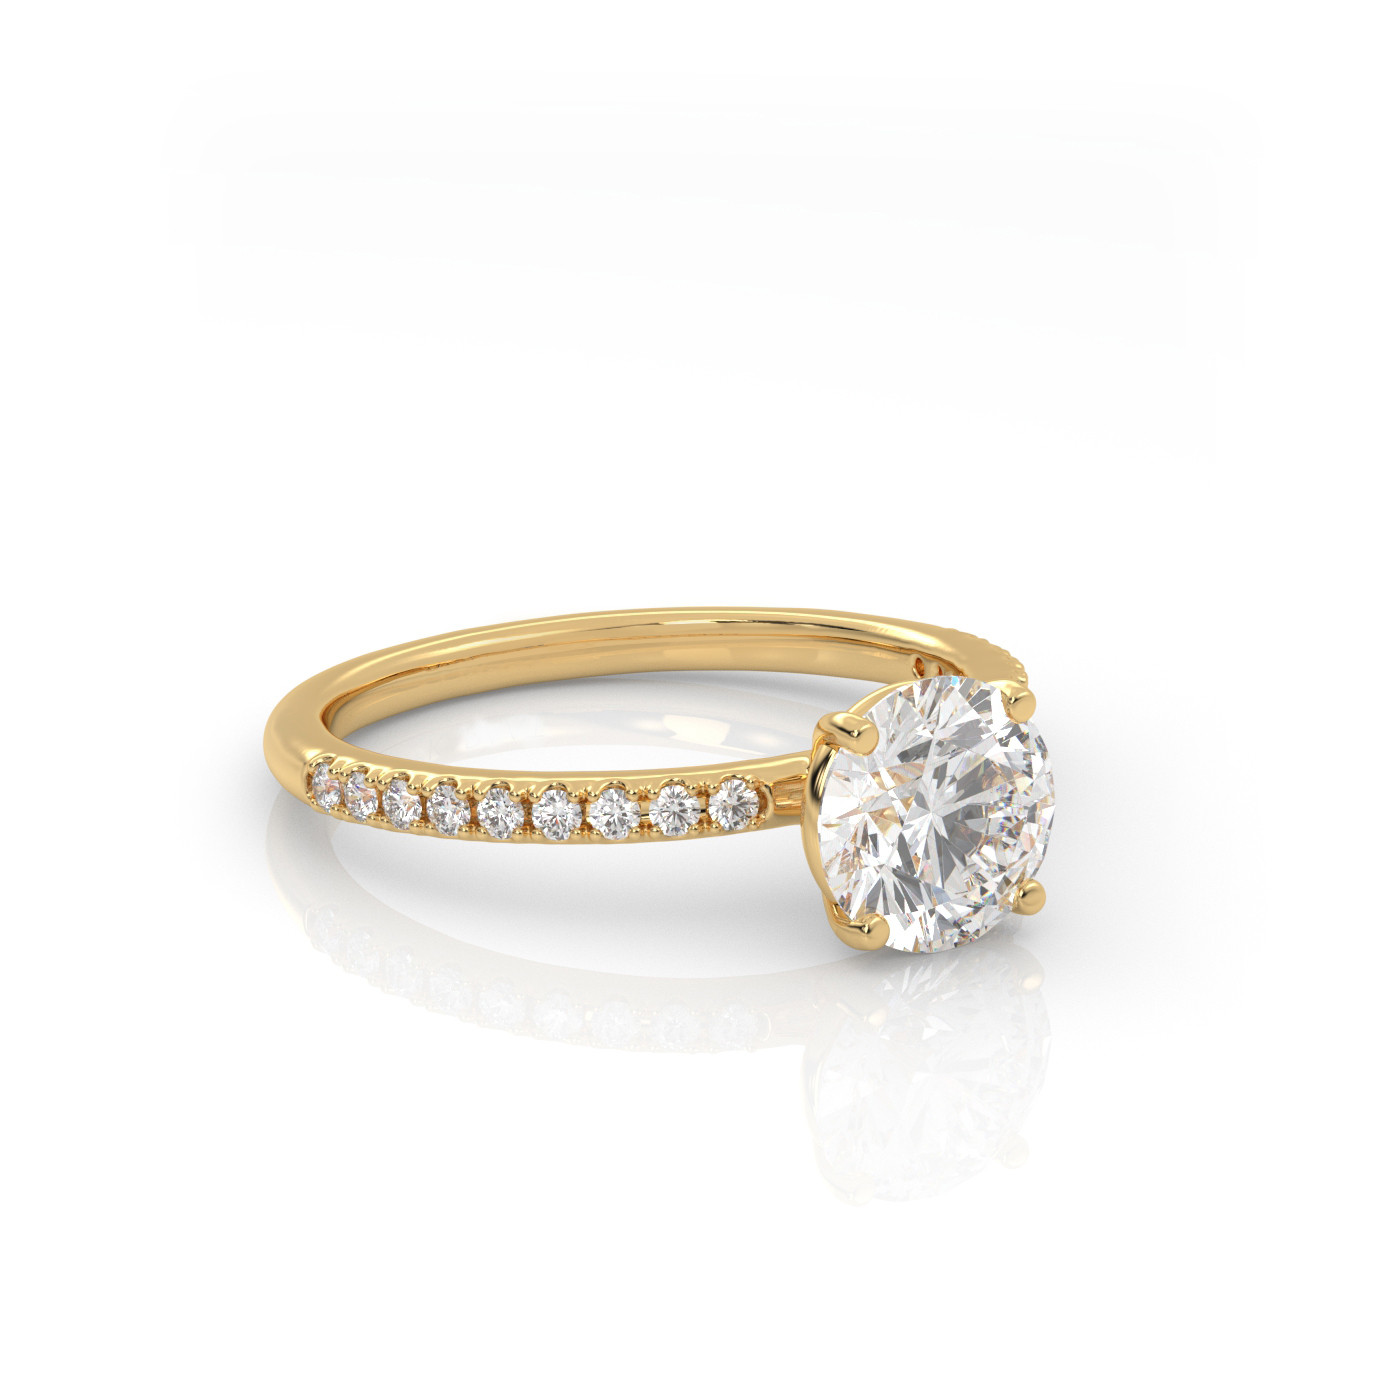 18K YELLOW GOLD Round Diamond Cut Solitaire Engagement Ring with Pave Band